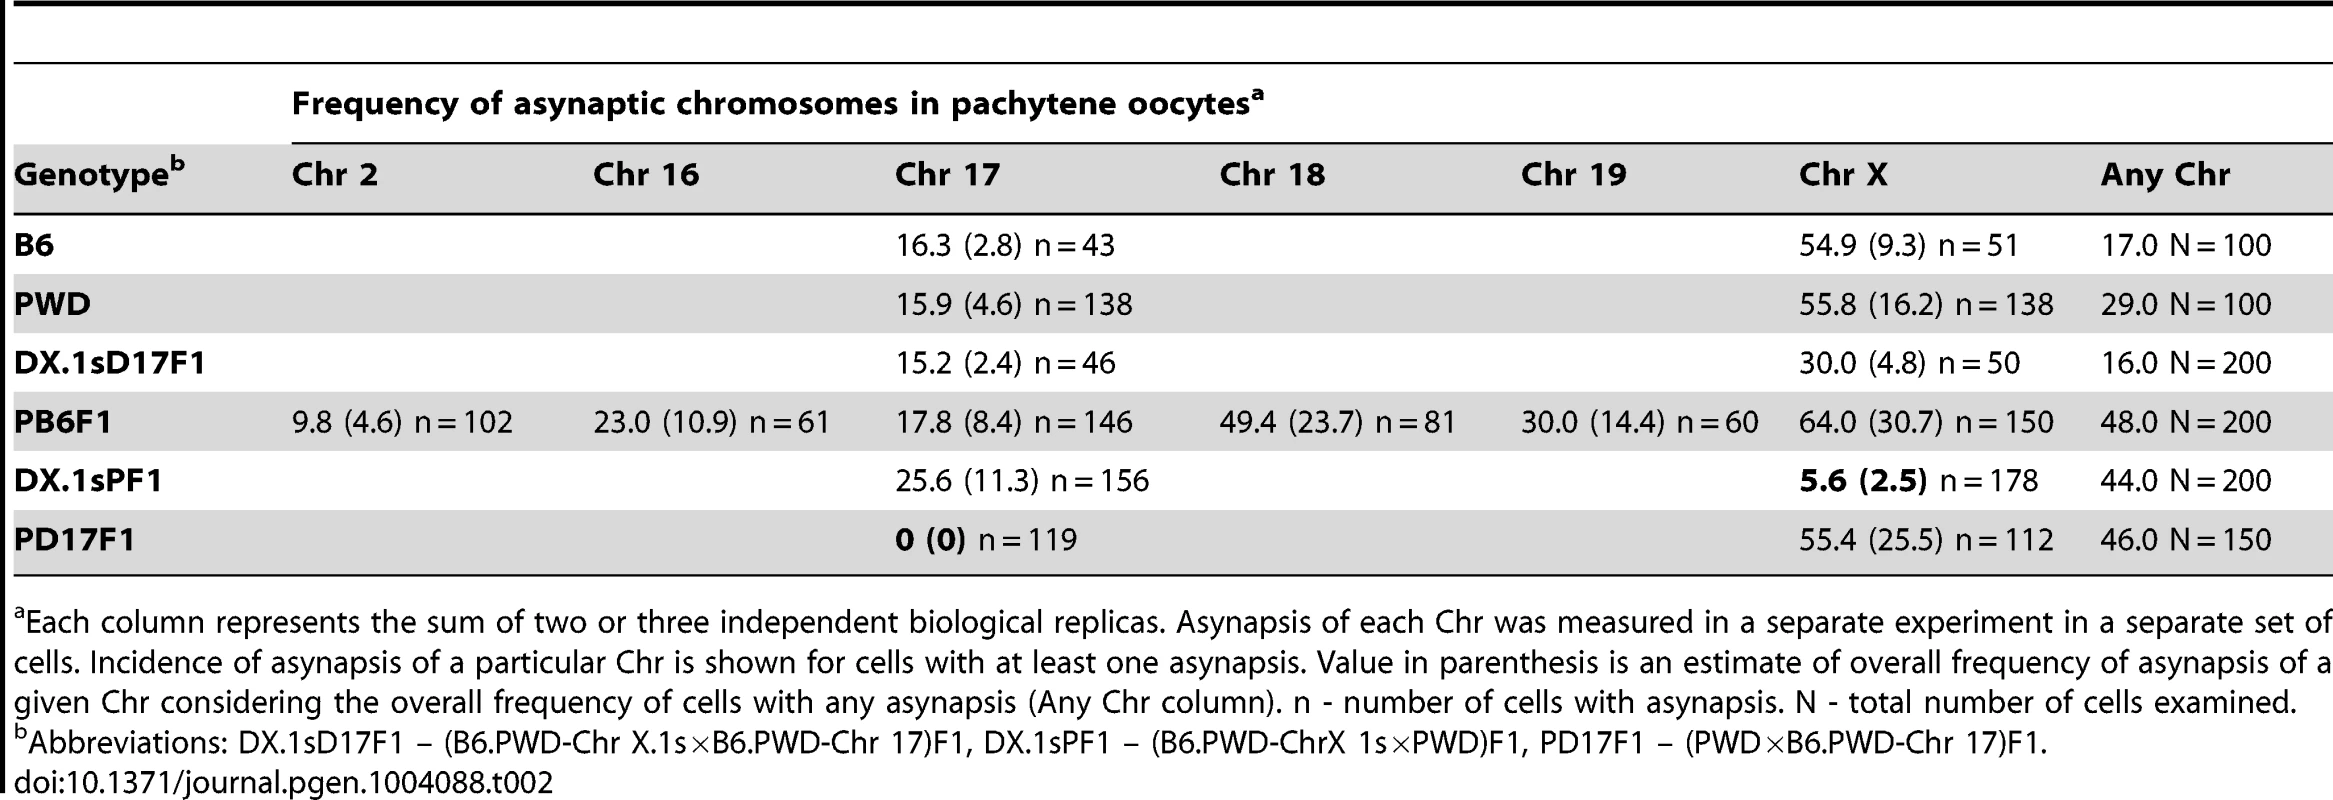 Asynapsis of individual chromosomes in pachytene oocytes of intersubspecific F1 hybrids and parental controls.